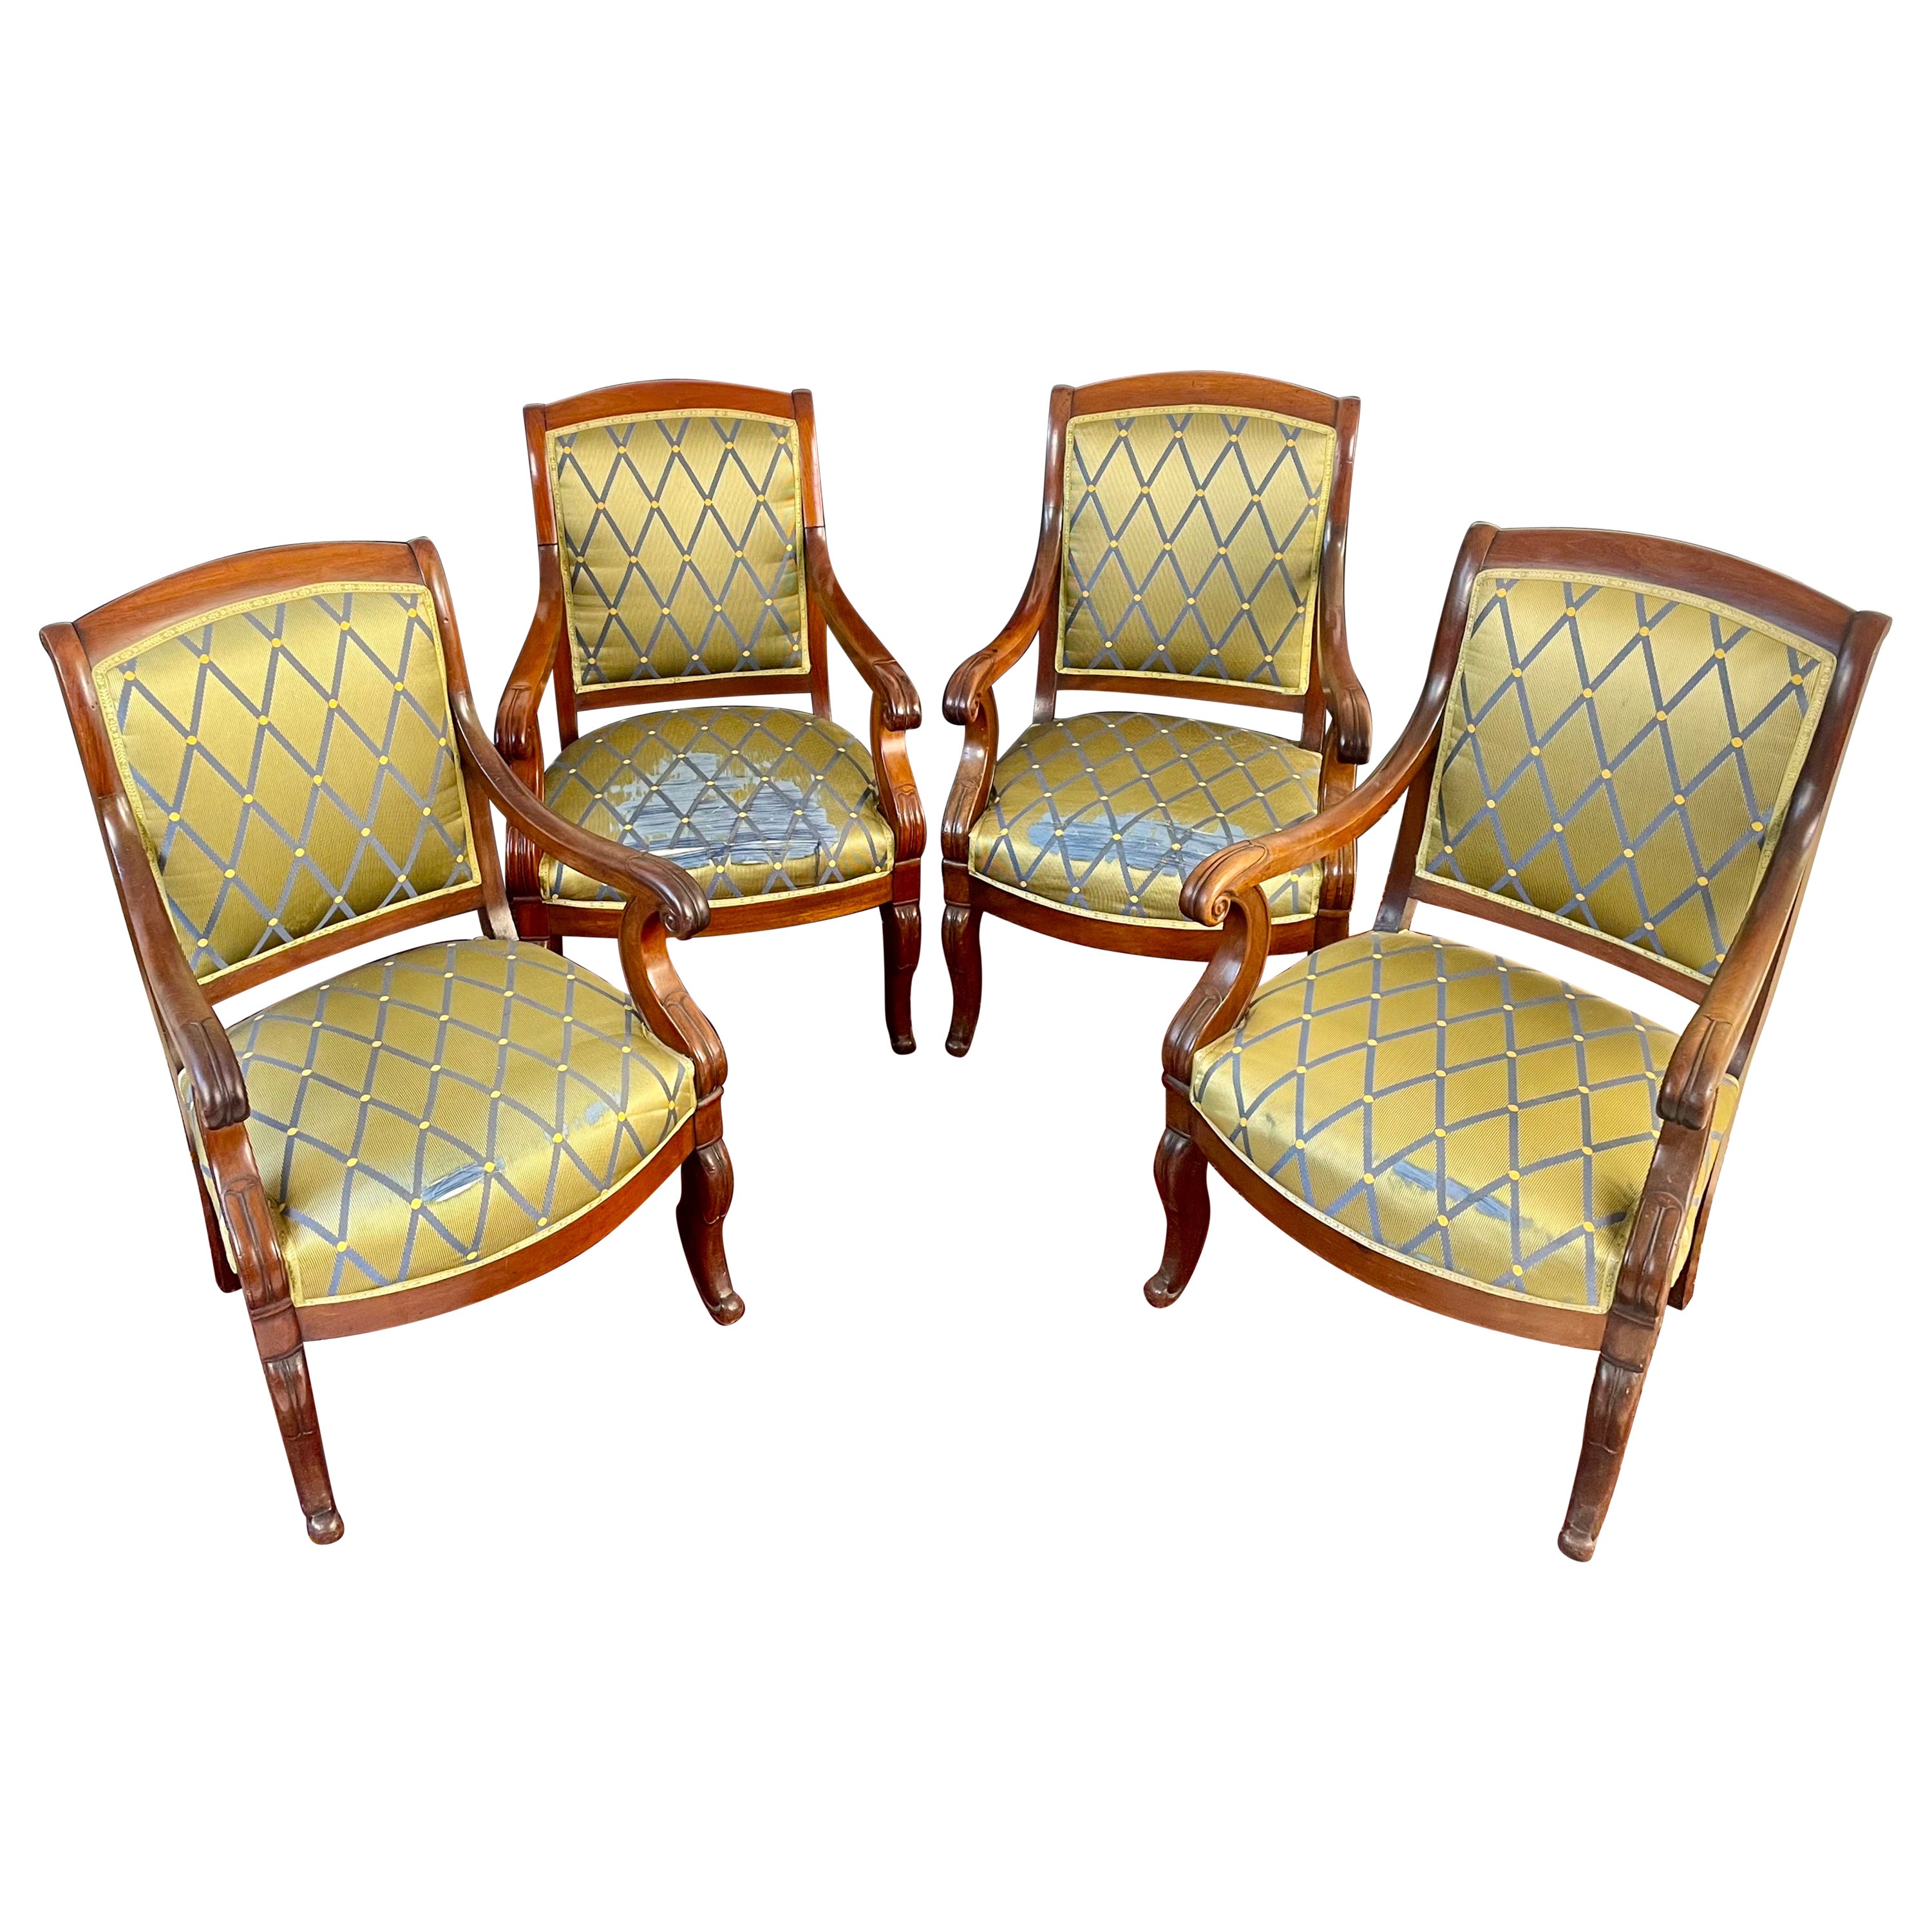 French Set of 4 Mahogany Armchairs, Restoration Period, 19th Century - France